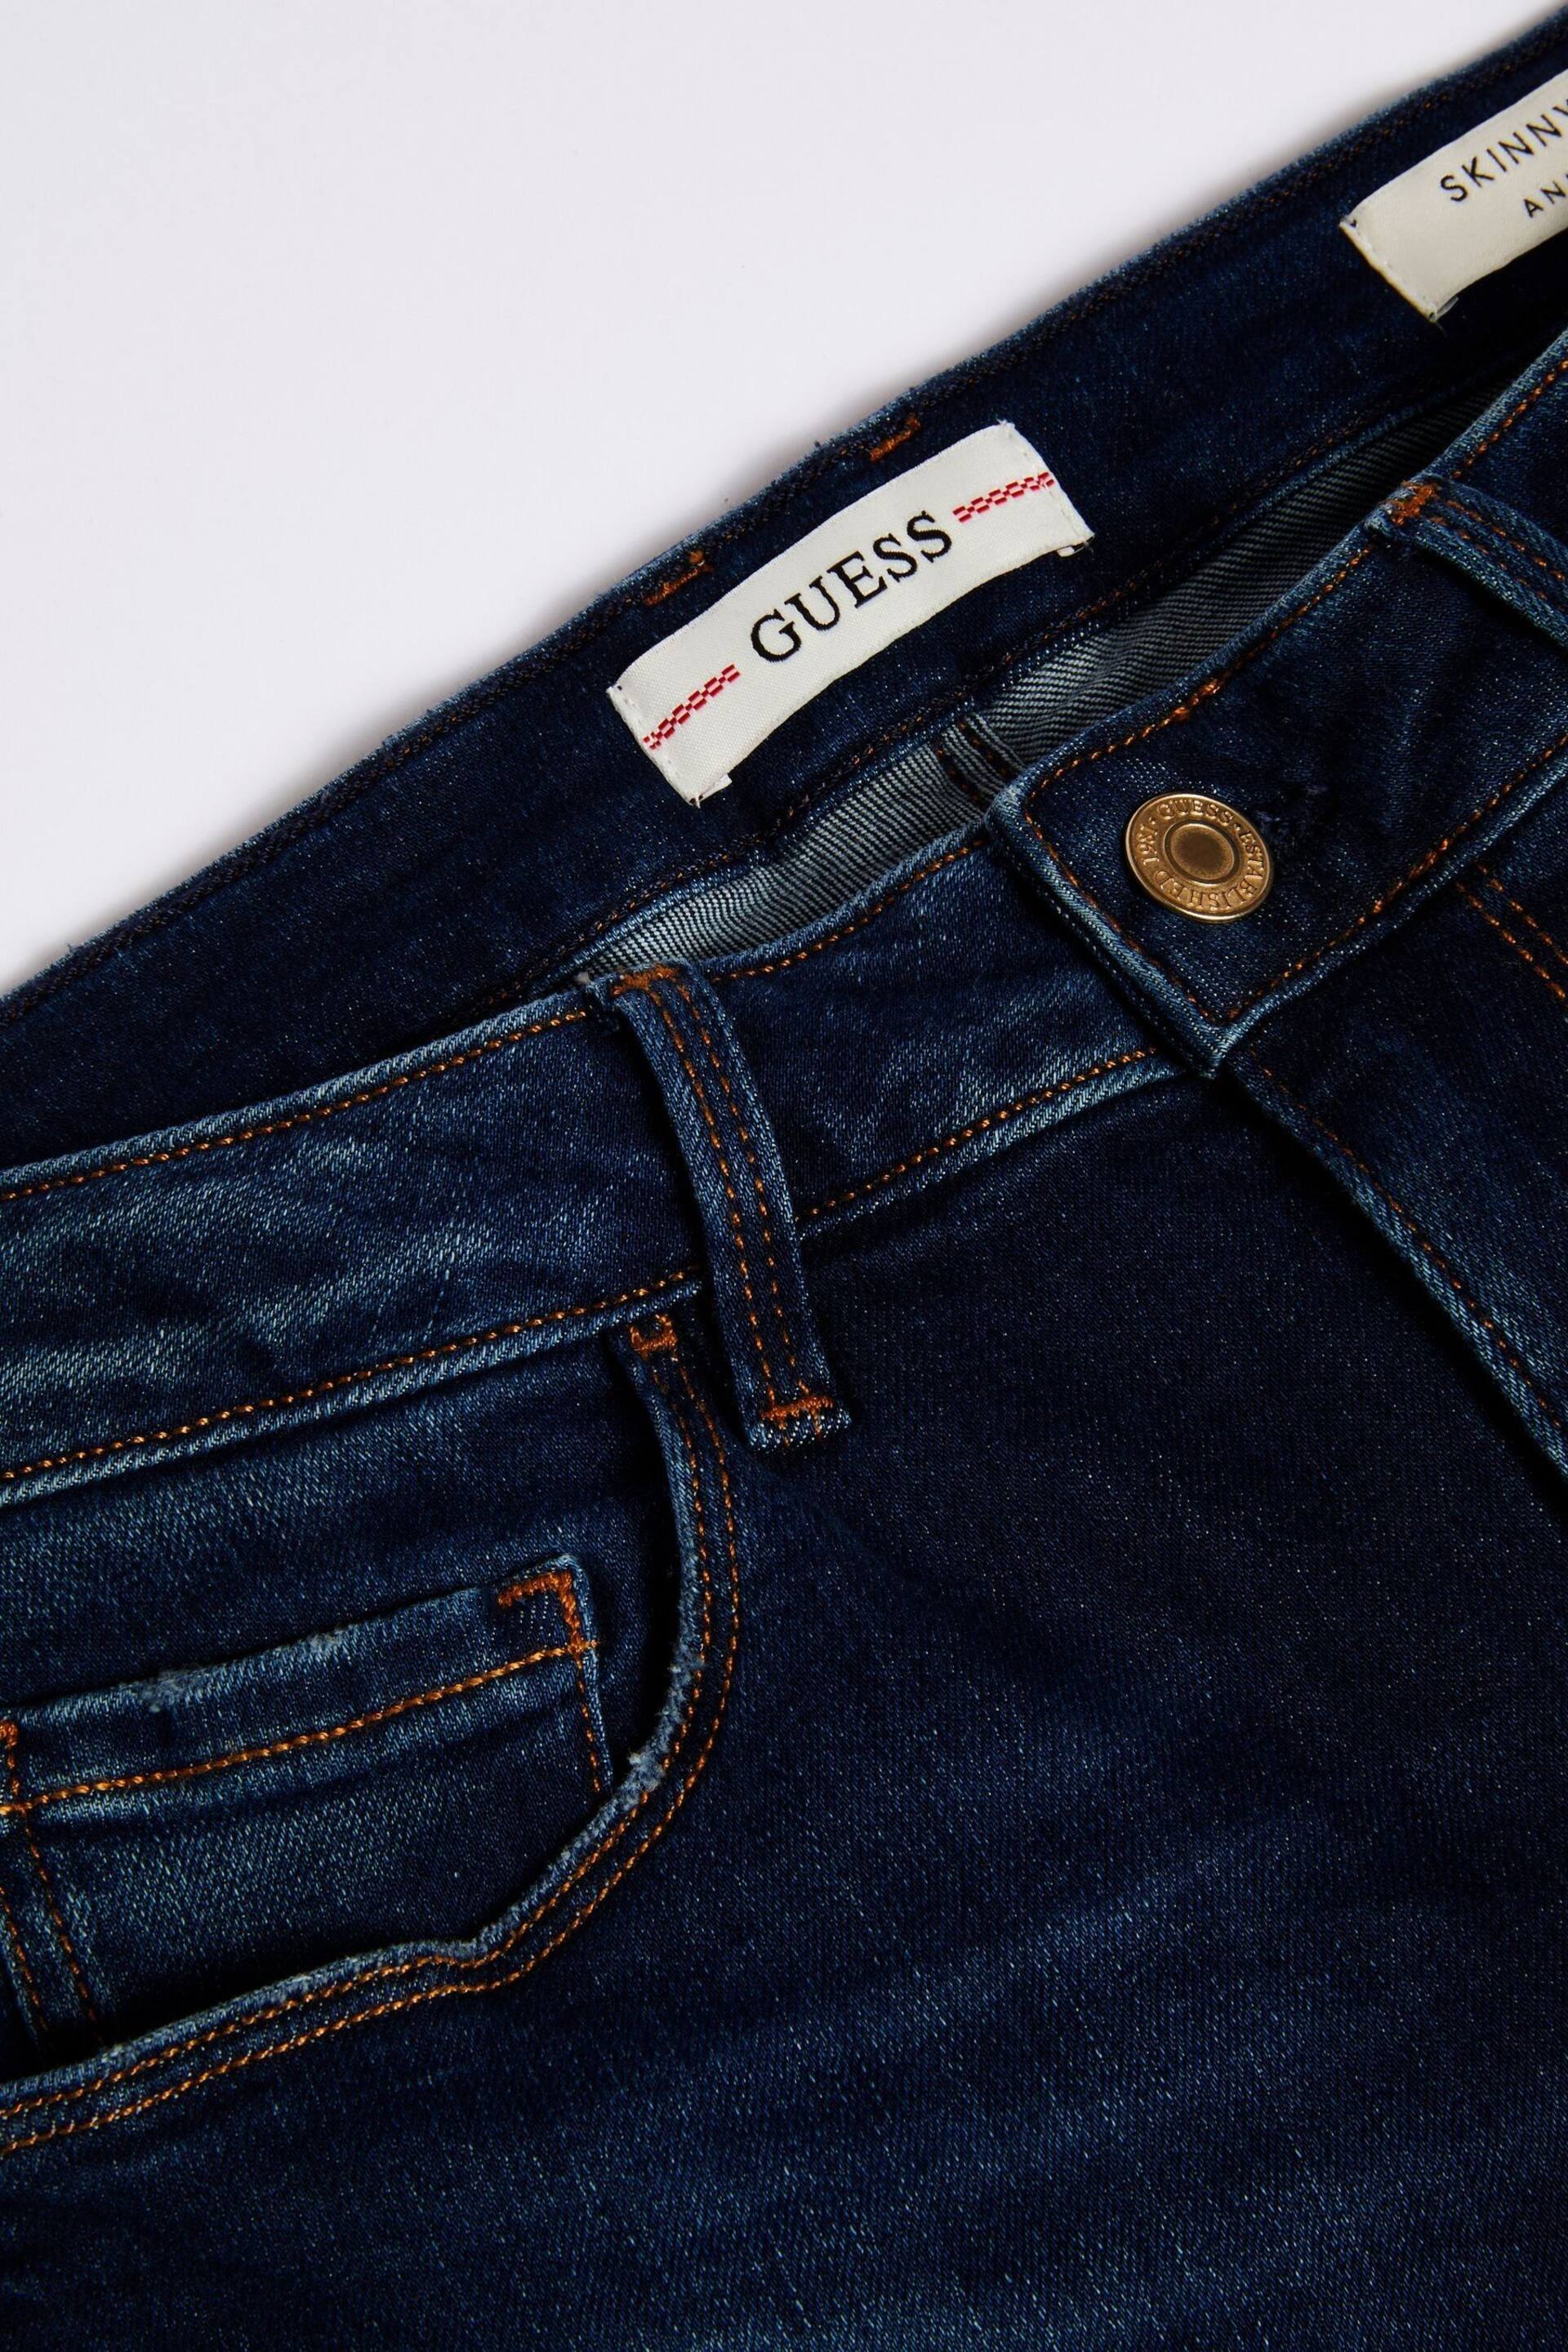 Guess Dark Blue Slim Fit Jeans - Image 4 of 5